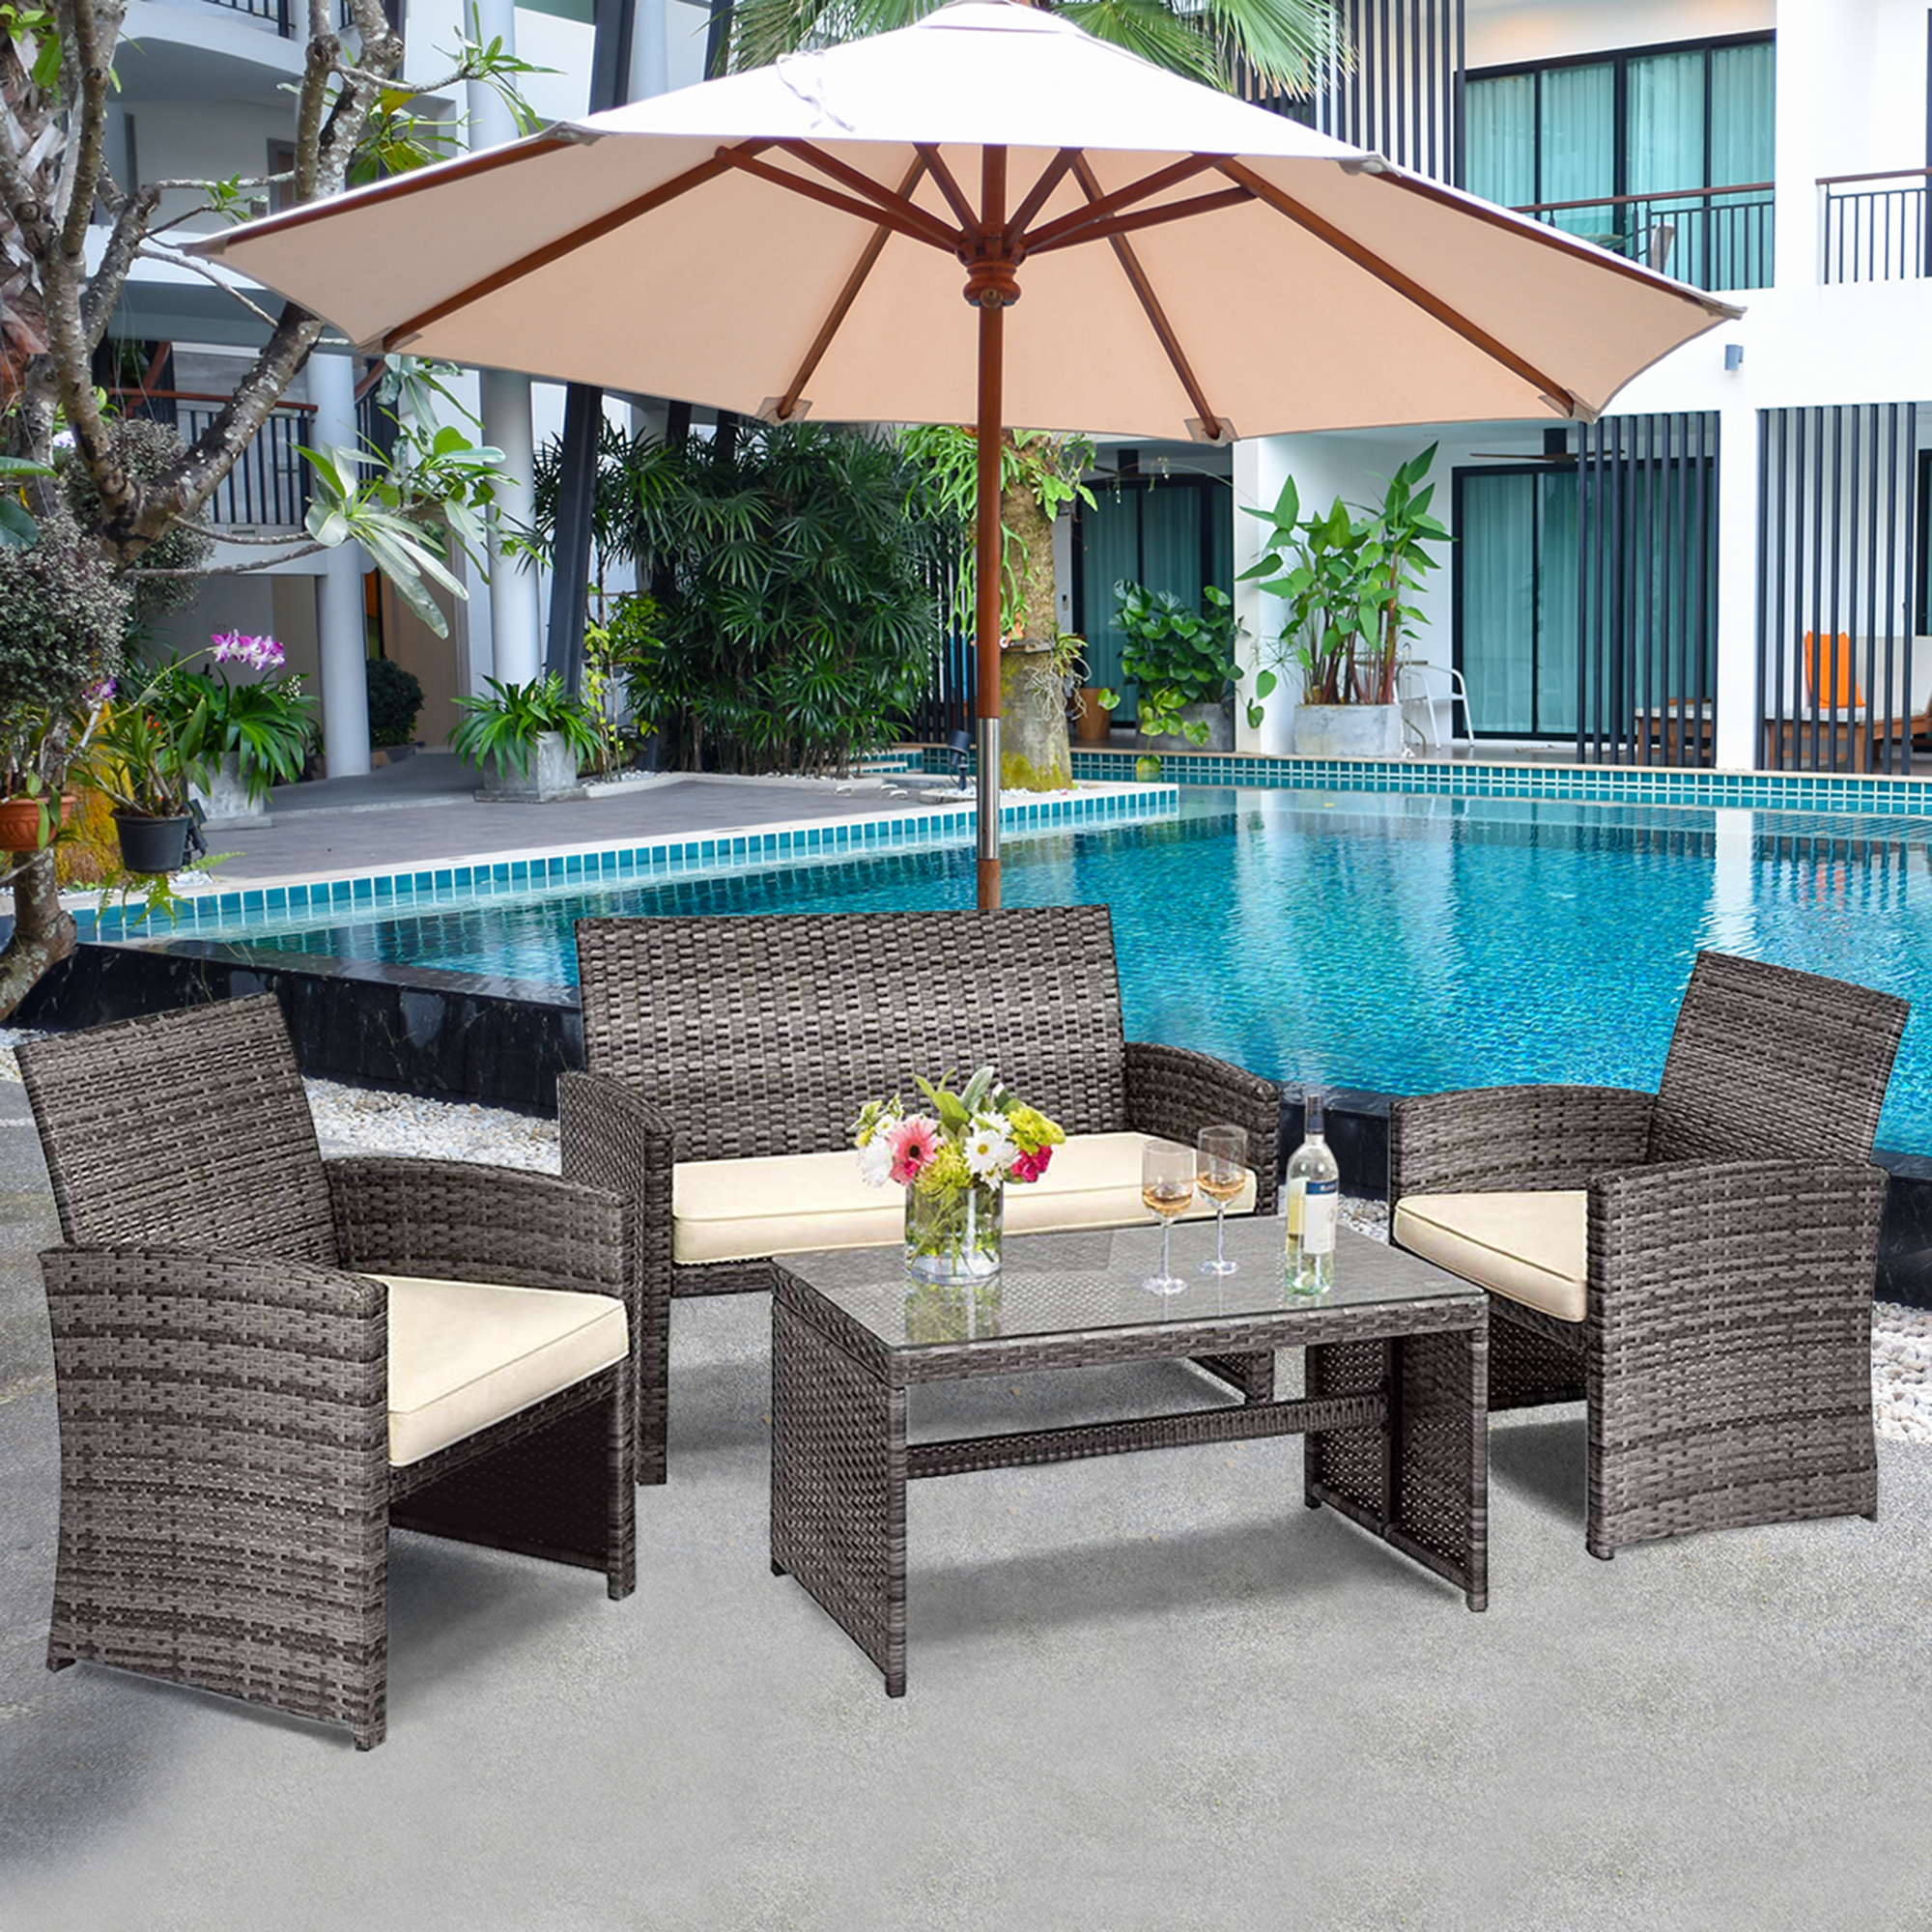 Gymax 8PCS Patio Outdoor Rattan Furniture Set w/ Cushioned Chair Loveseat Table - image 5 of 10